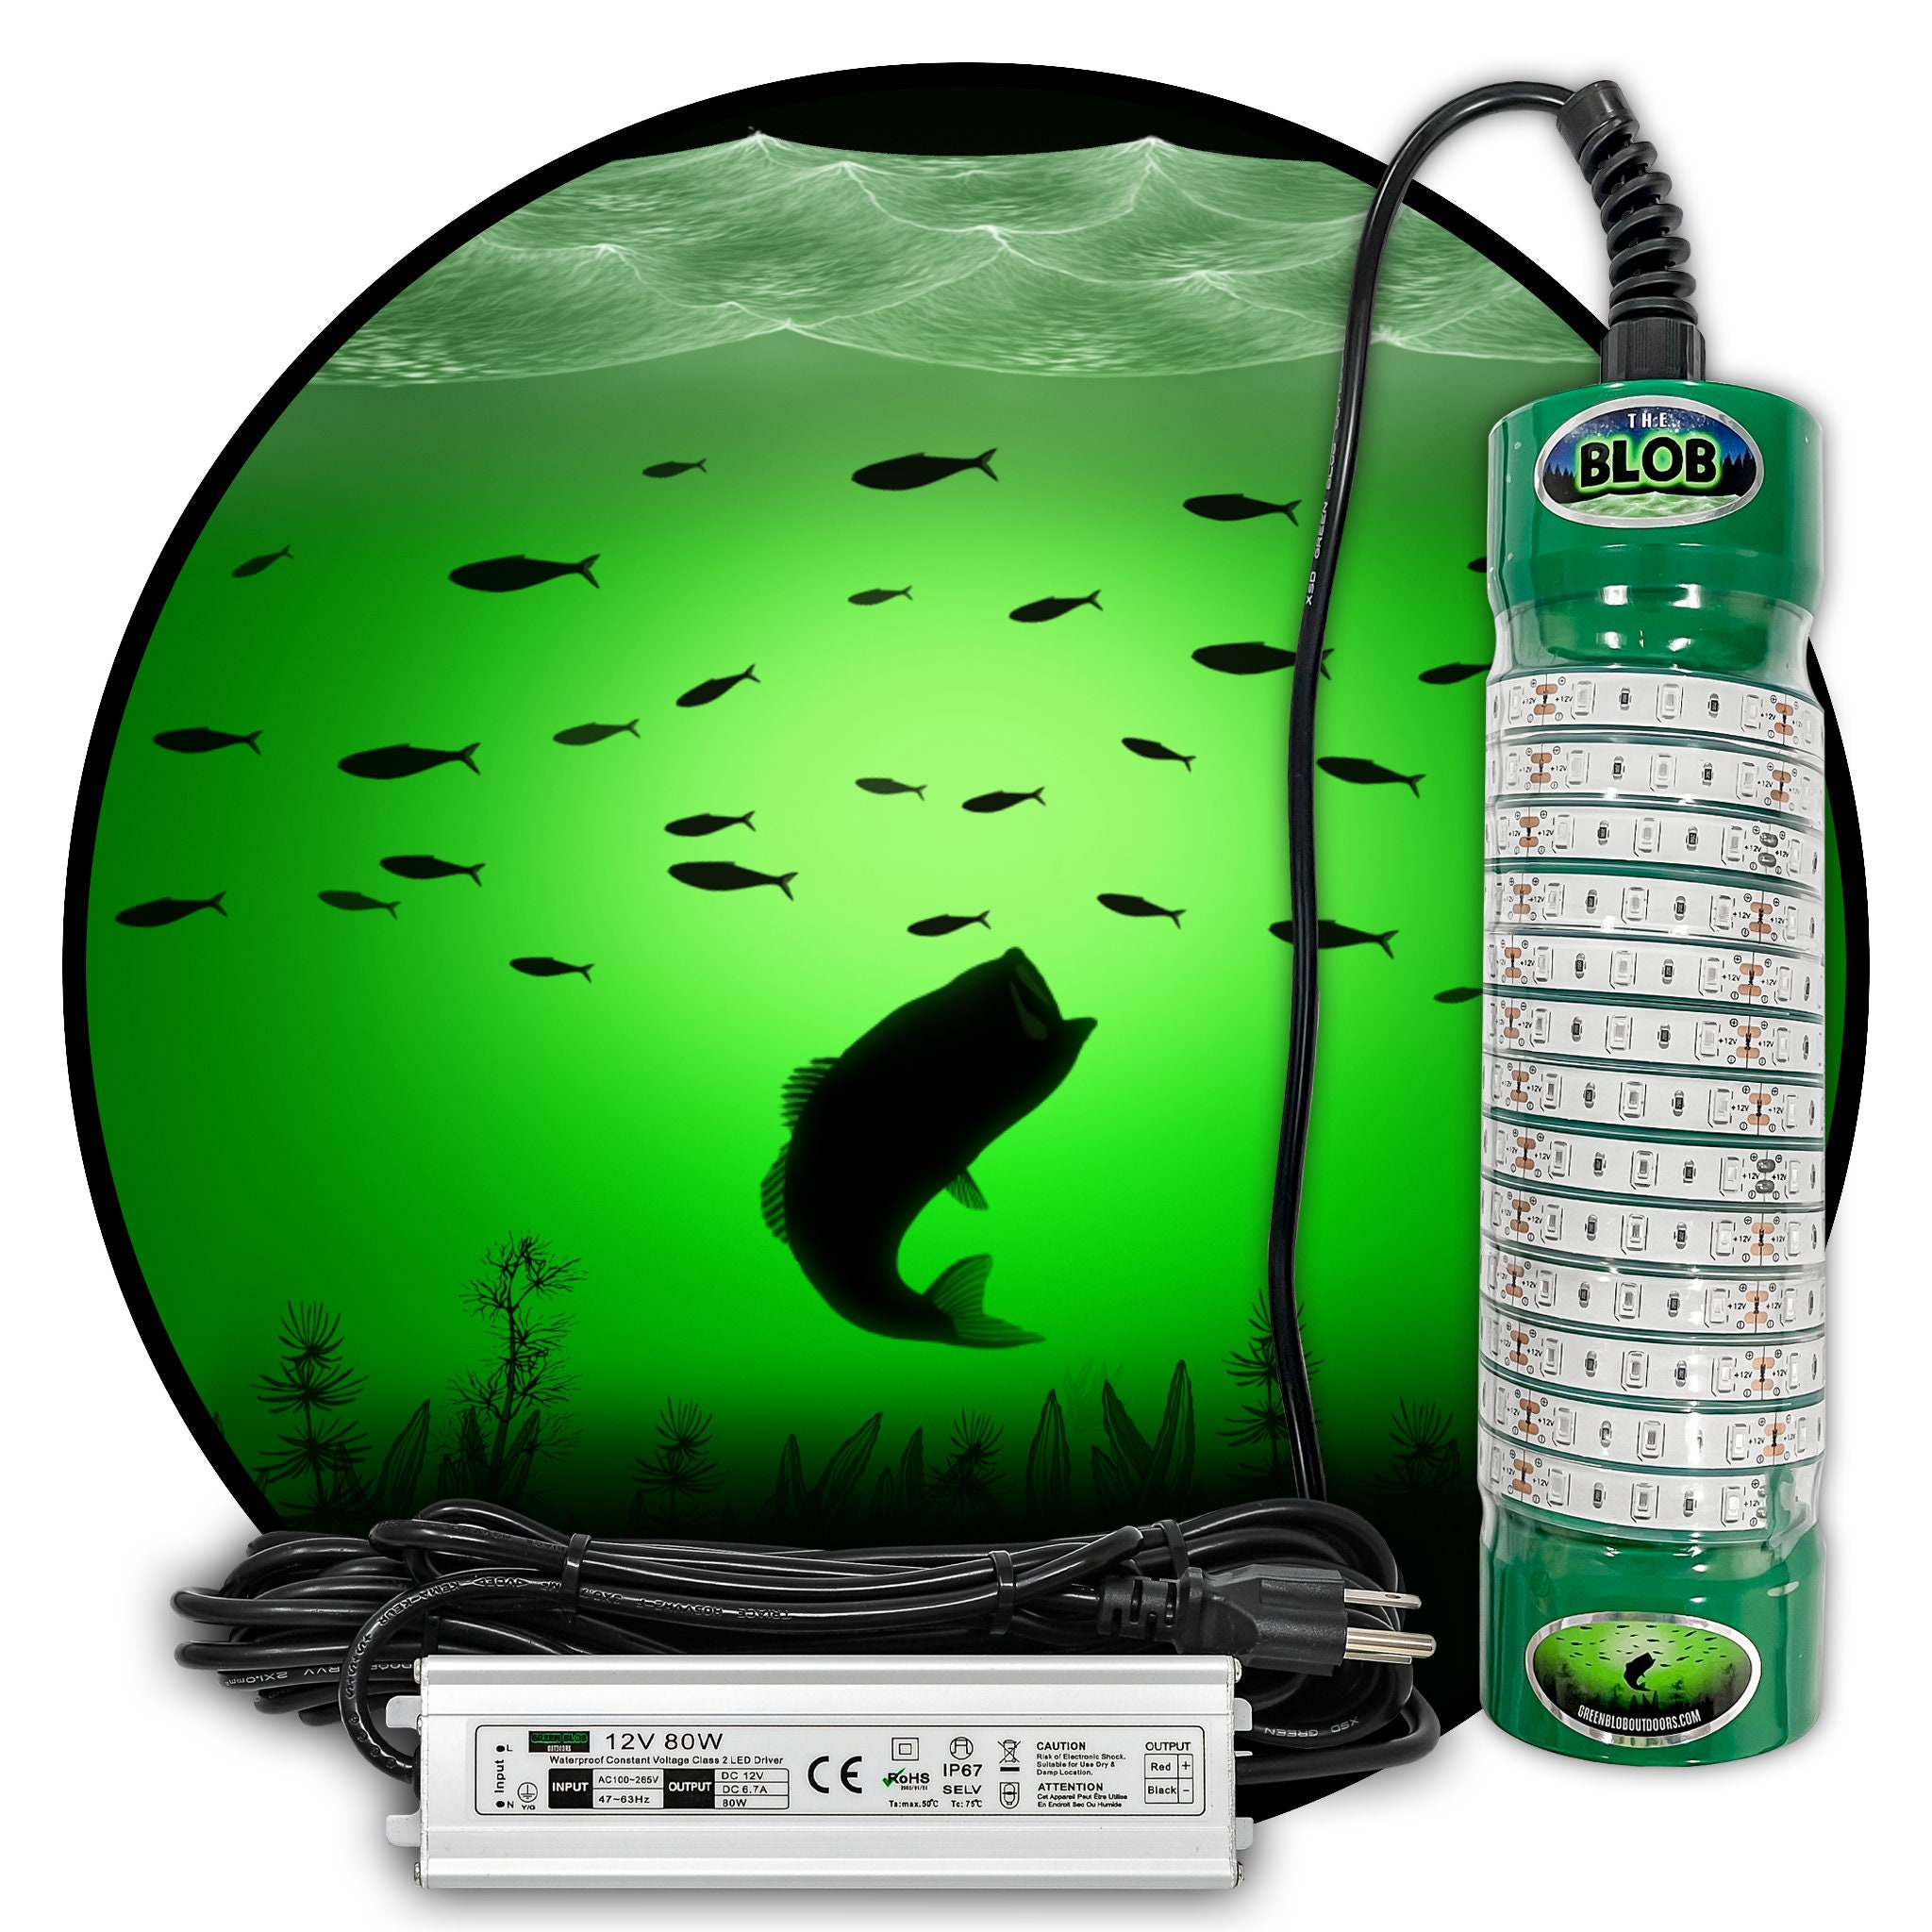 LED Underwater Fishing Light Green Blob Outdoors, Boat & Dock Night Fishing  Attractor, Waterproof, Durable, Perfect Gift for Fishermen 